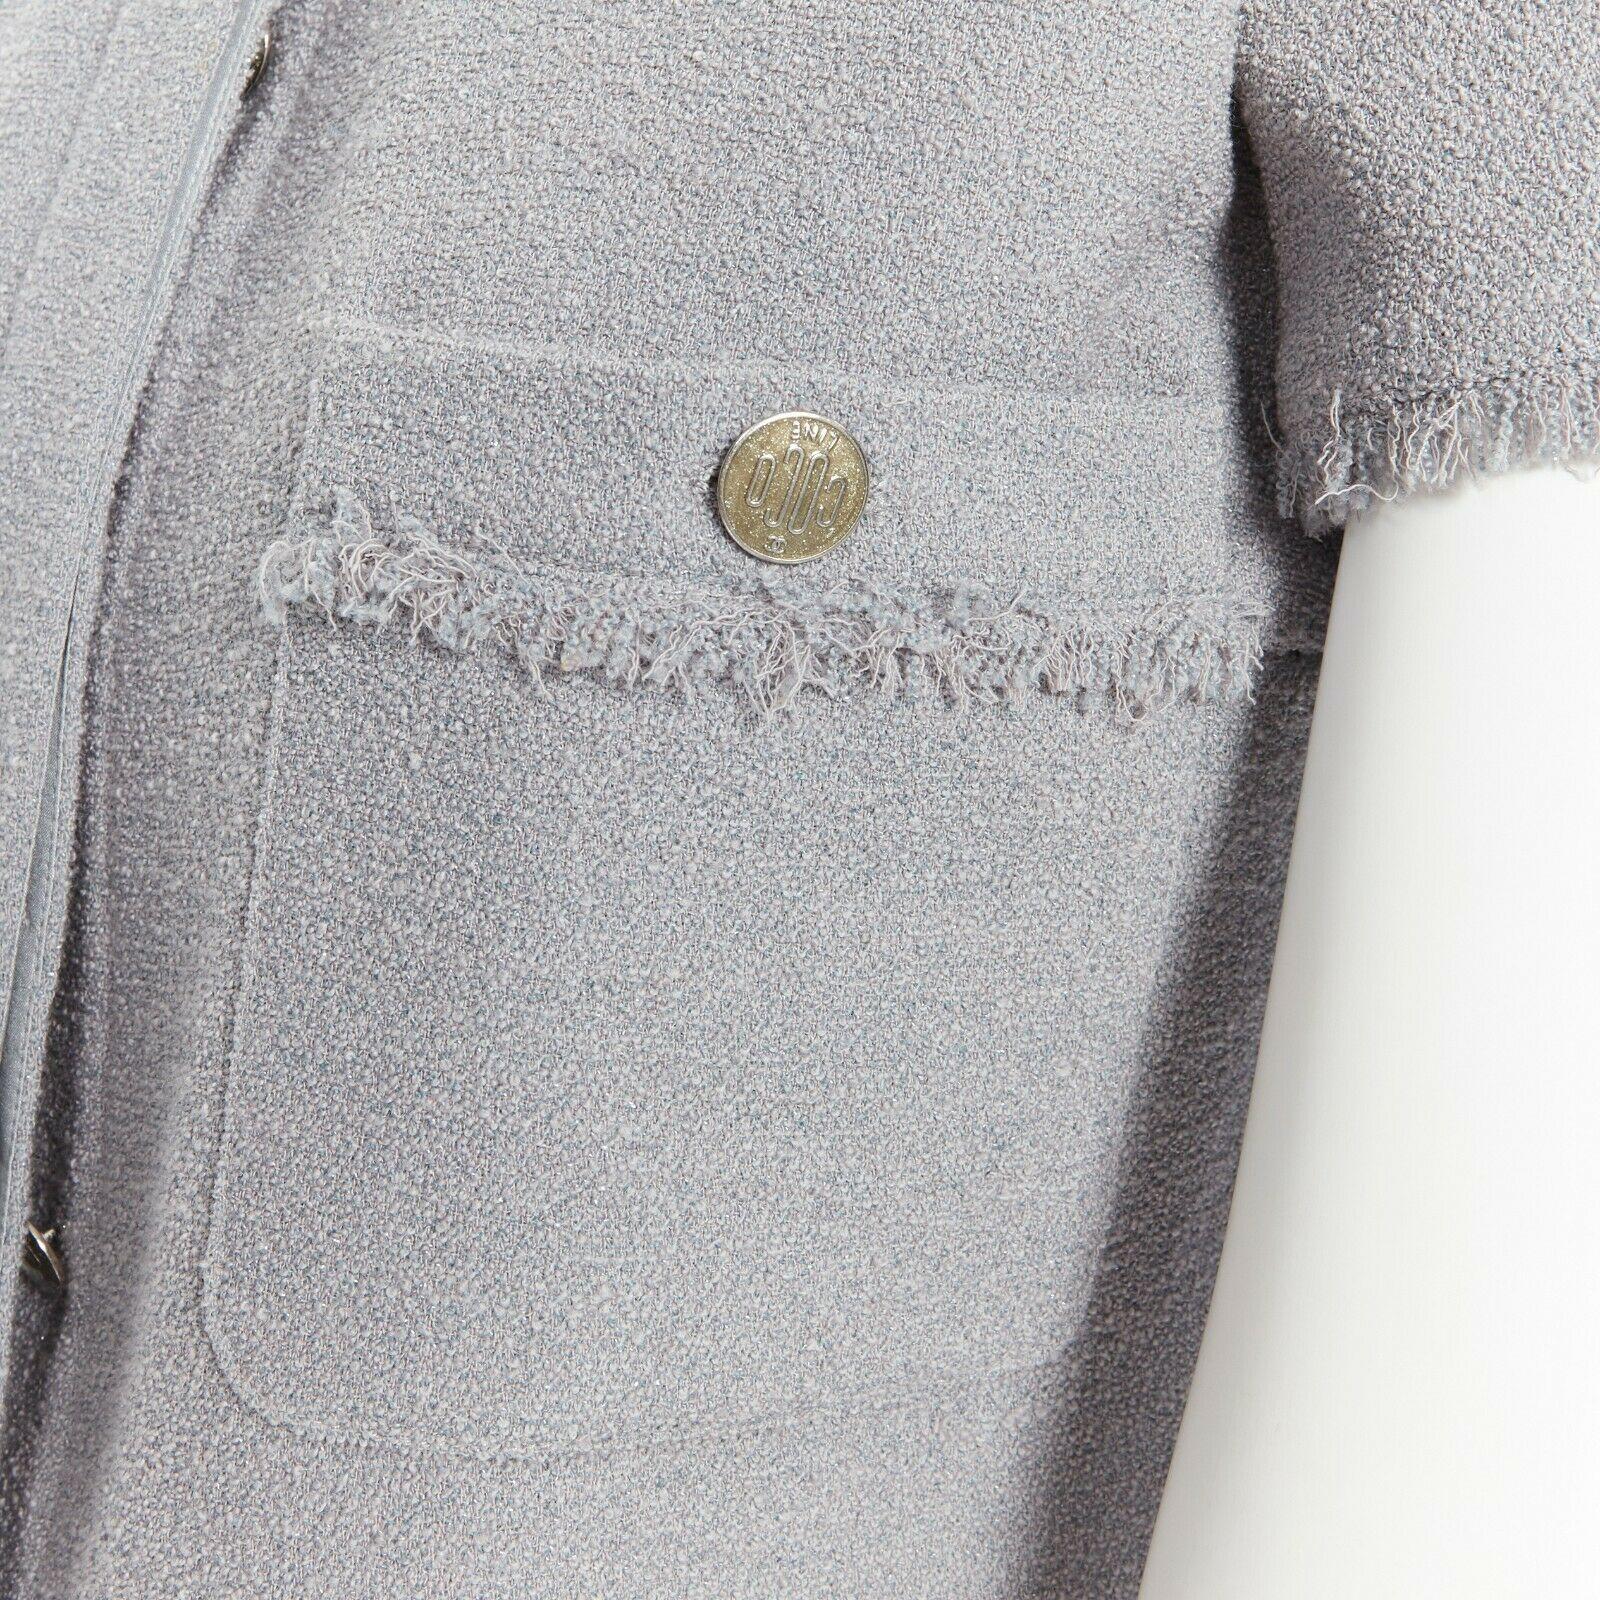 CHANEL cadet grey short sleeves slim-fit frayed hem summer tweed jacket FR 34 XS

CHANEL
Sparkly cadet grey. Wool and nylon tweed mixed. Slim-fit silhouette. Short sleeves. Collarless rounded neckline. Frayed hems. Decorated with silver buttons.